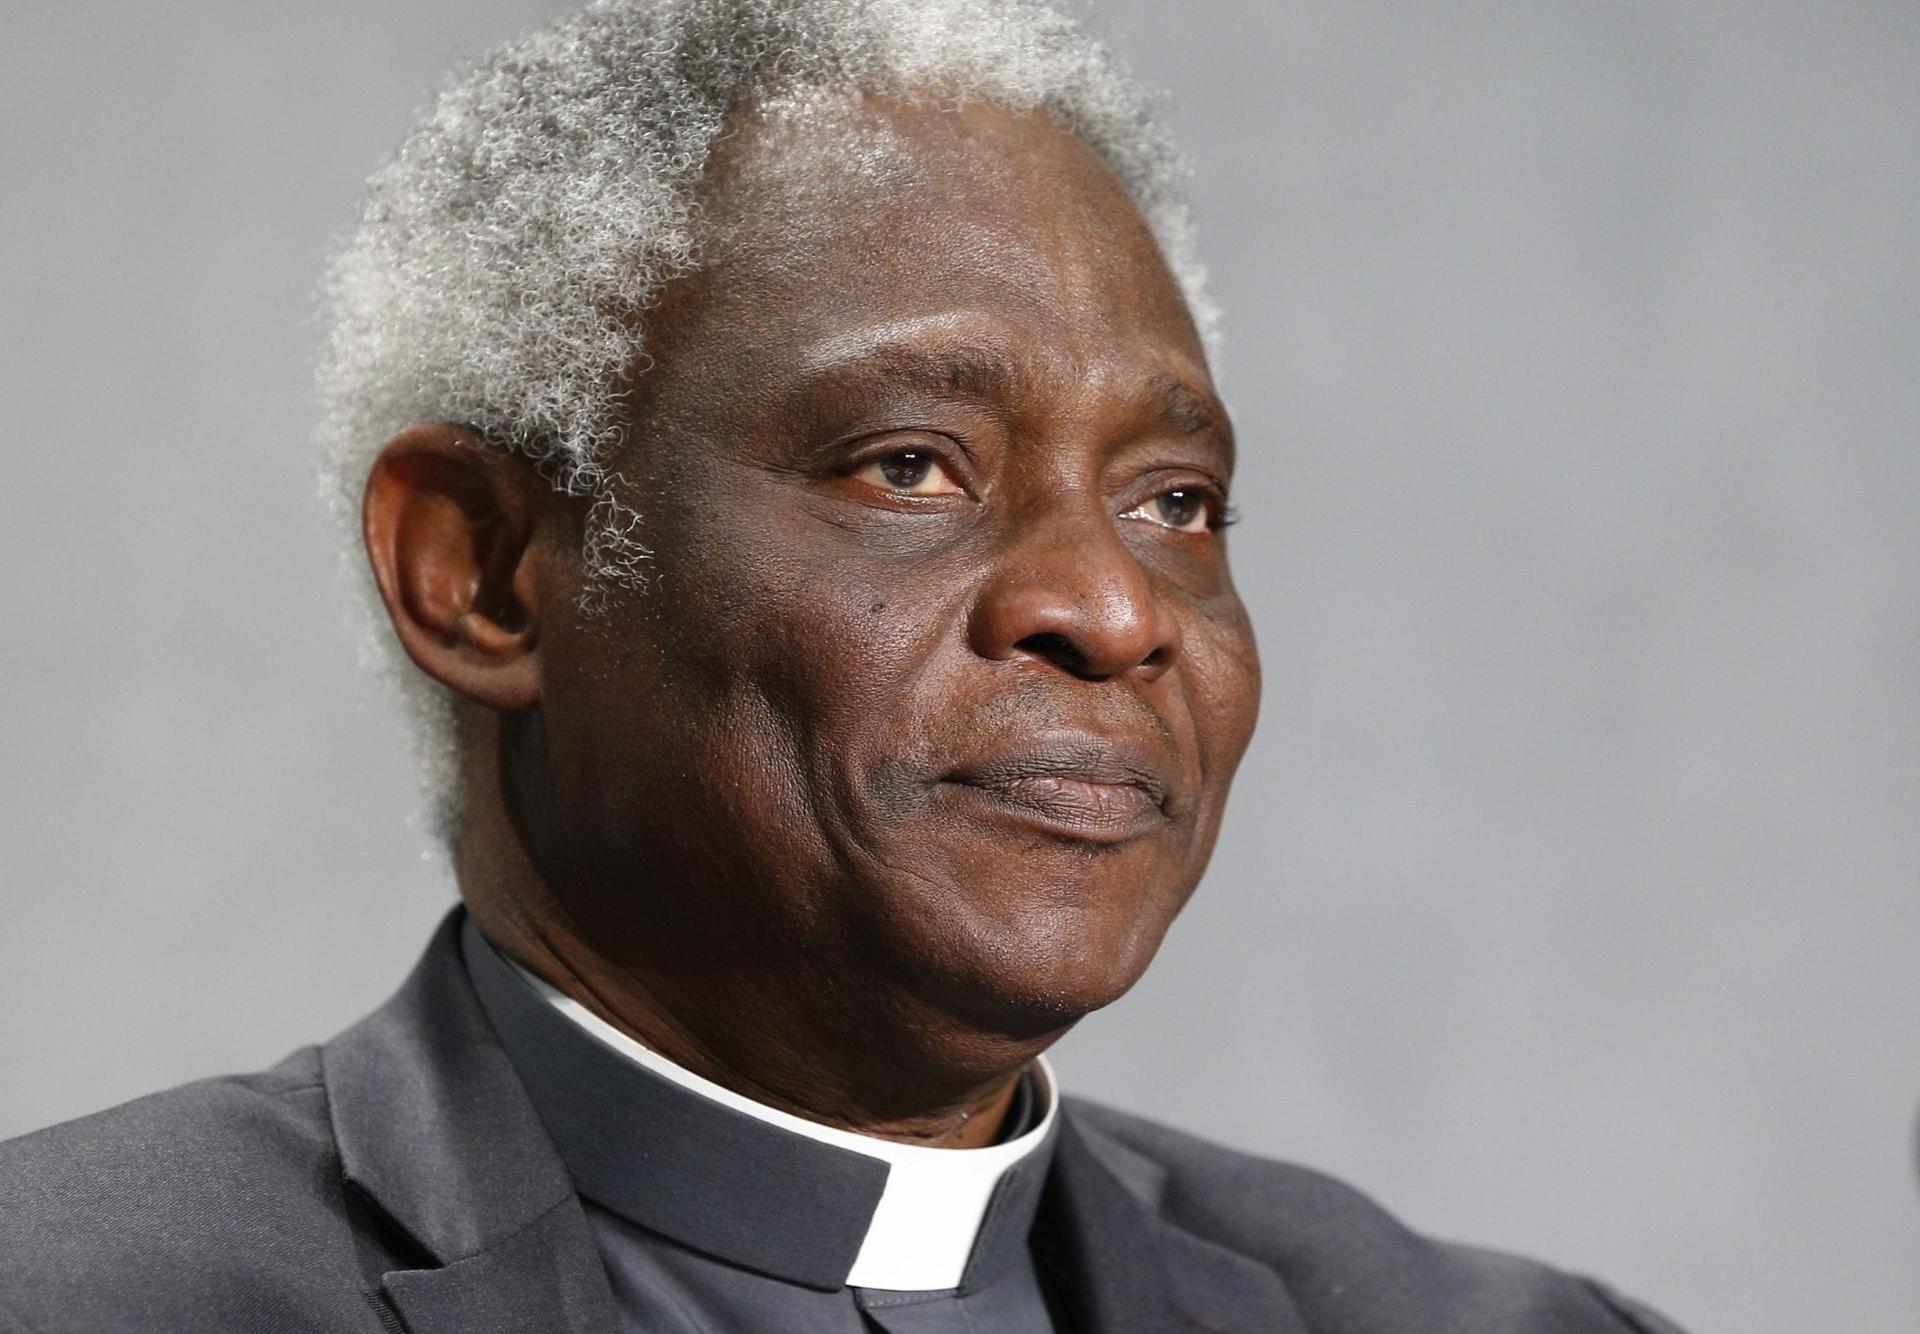 Turkson on resignation: It’s up to the pope to decide